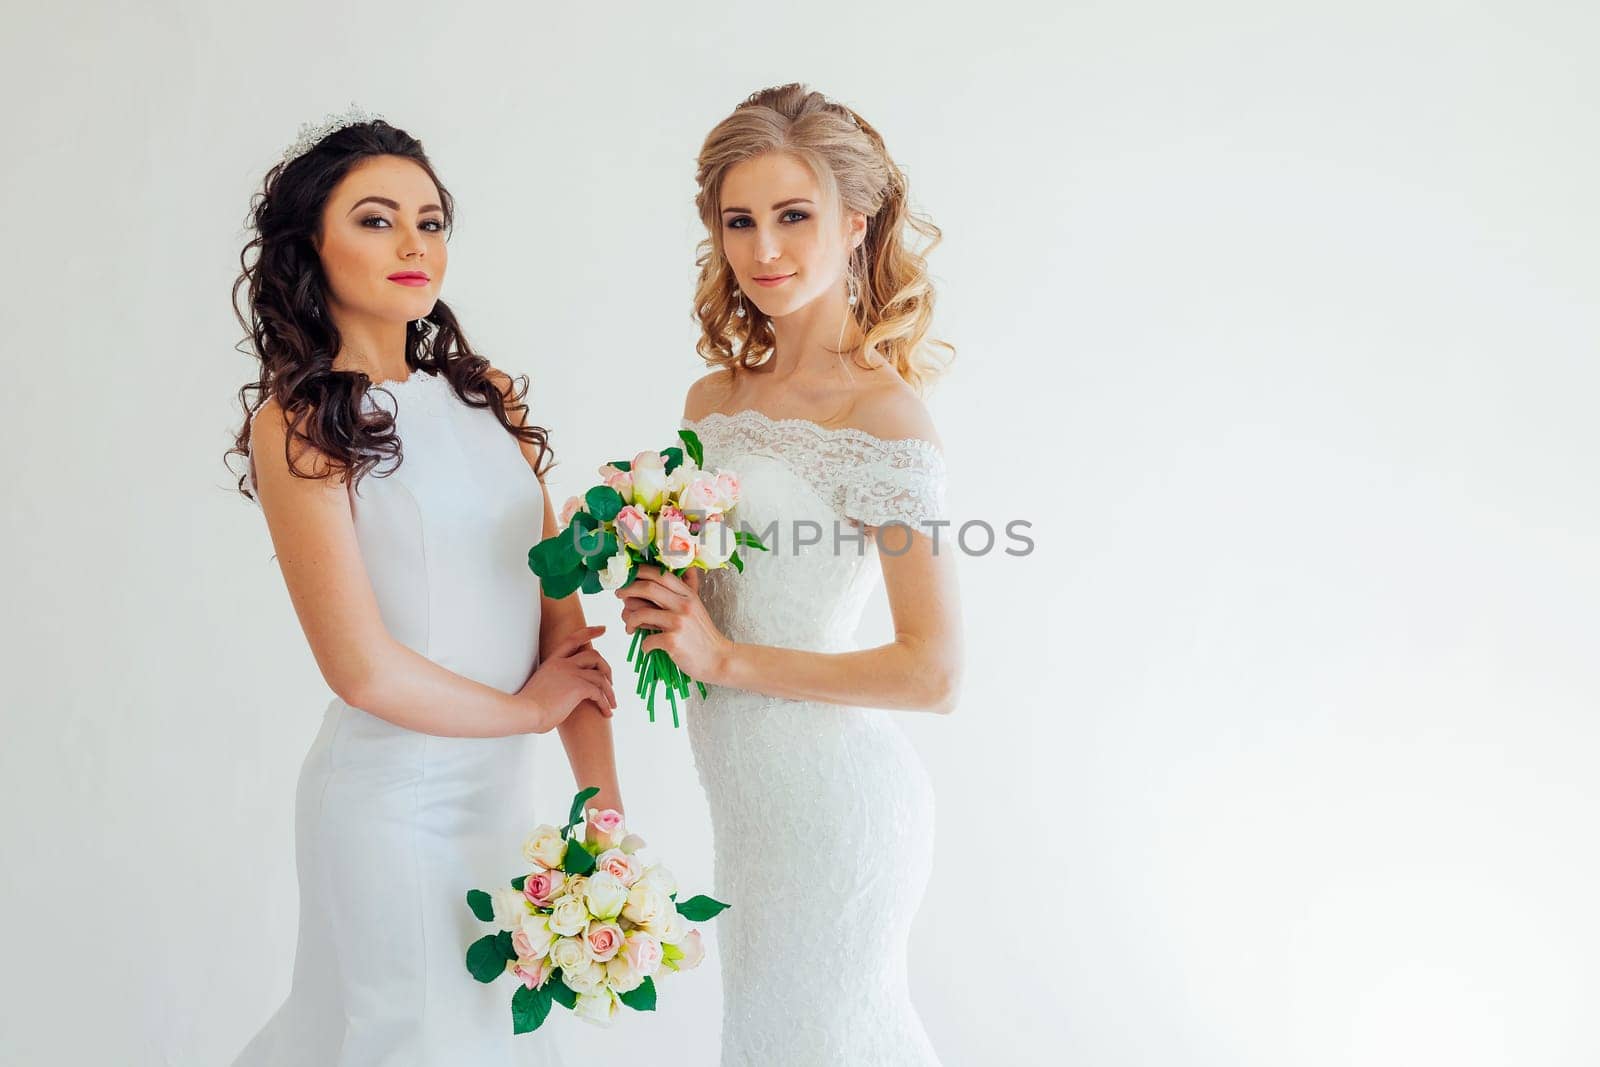 two wedding bride with bouquet wedding flowers by Simakov